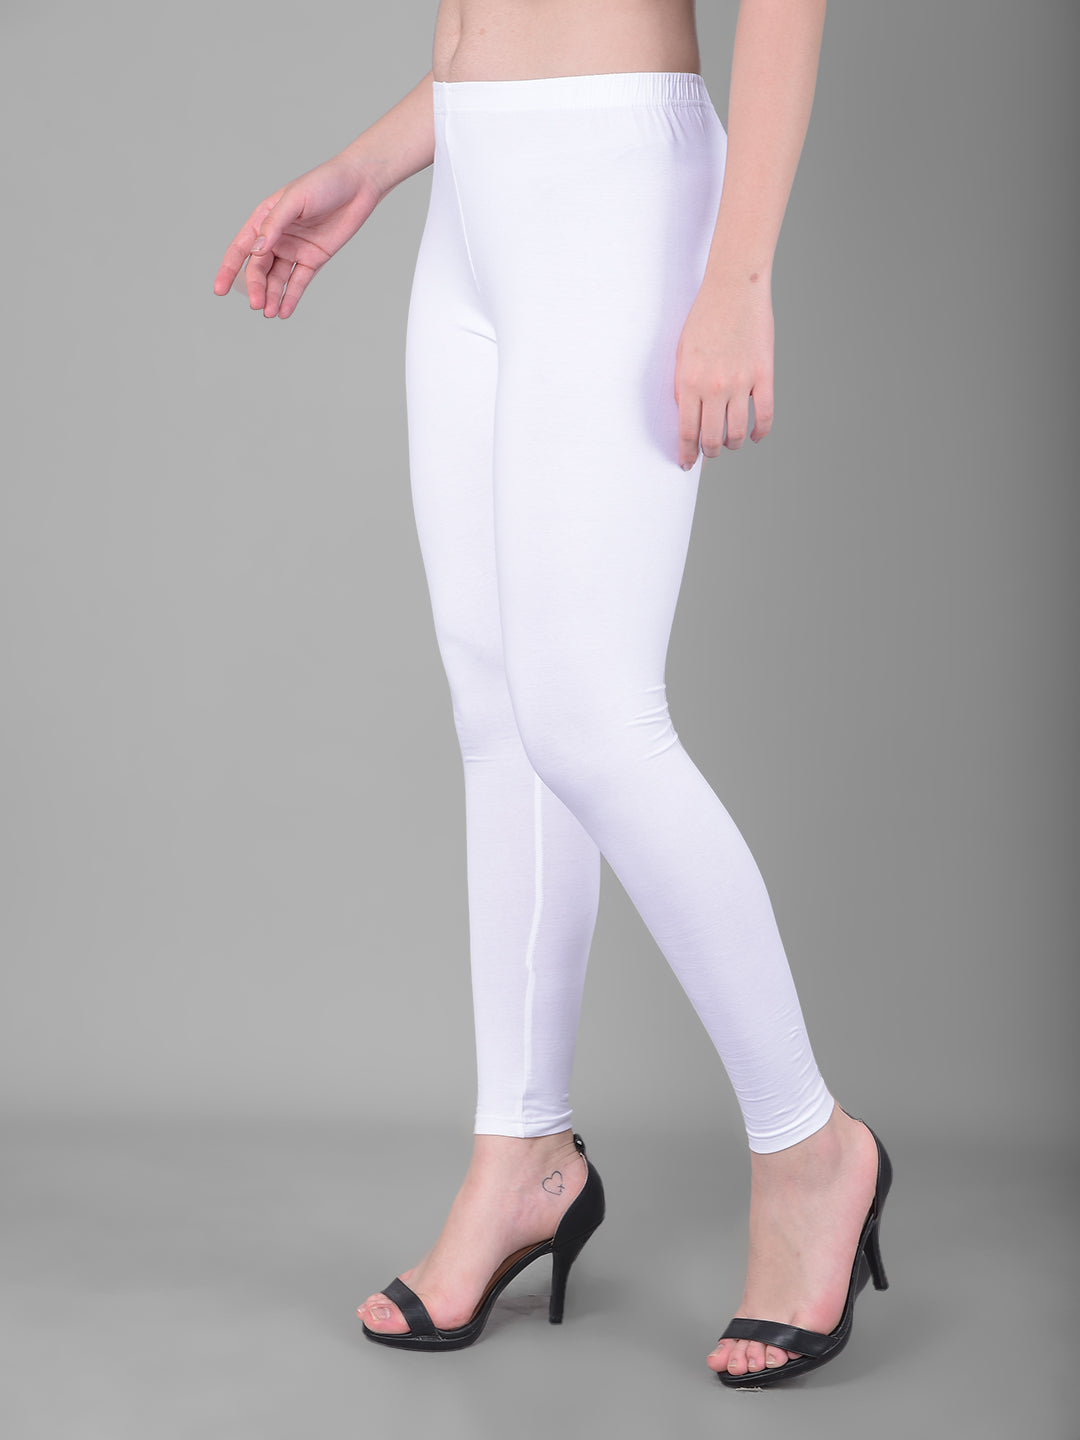 Comfort Lady Legging Price Starting From Rs 353. Find Verified Sellers in  Pune - JdMart